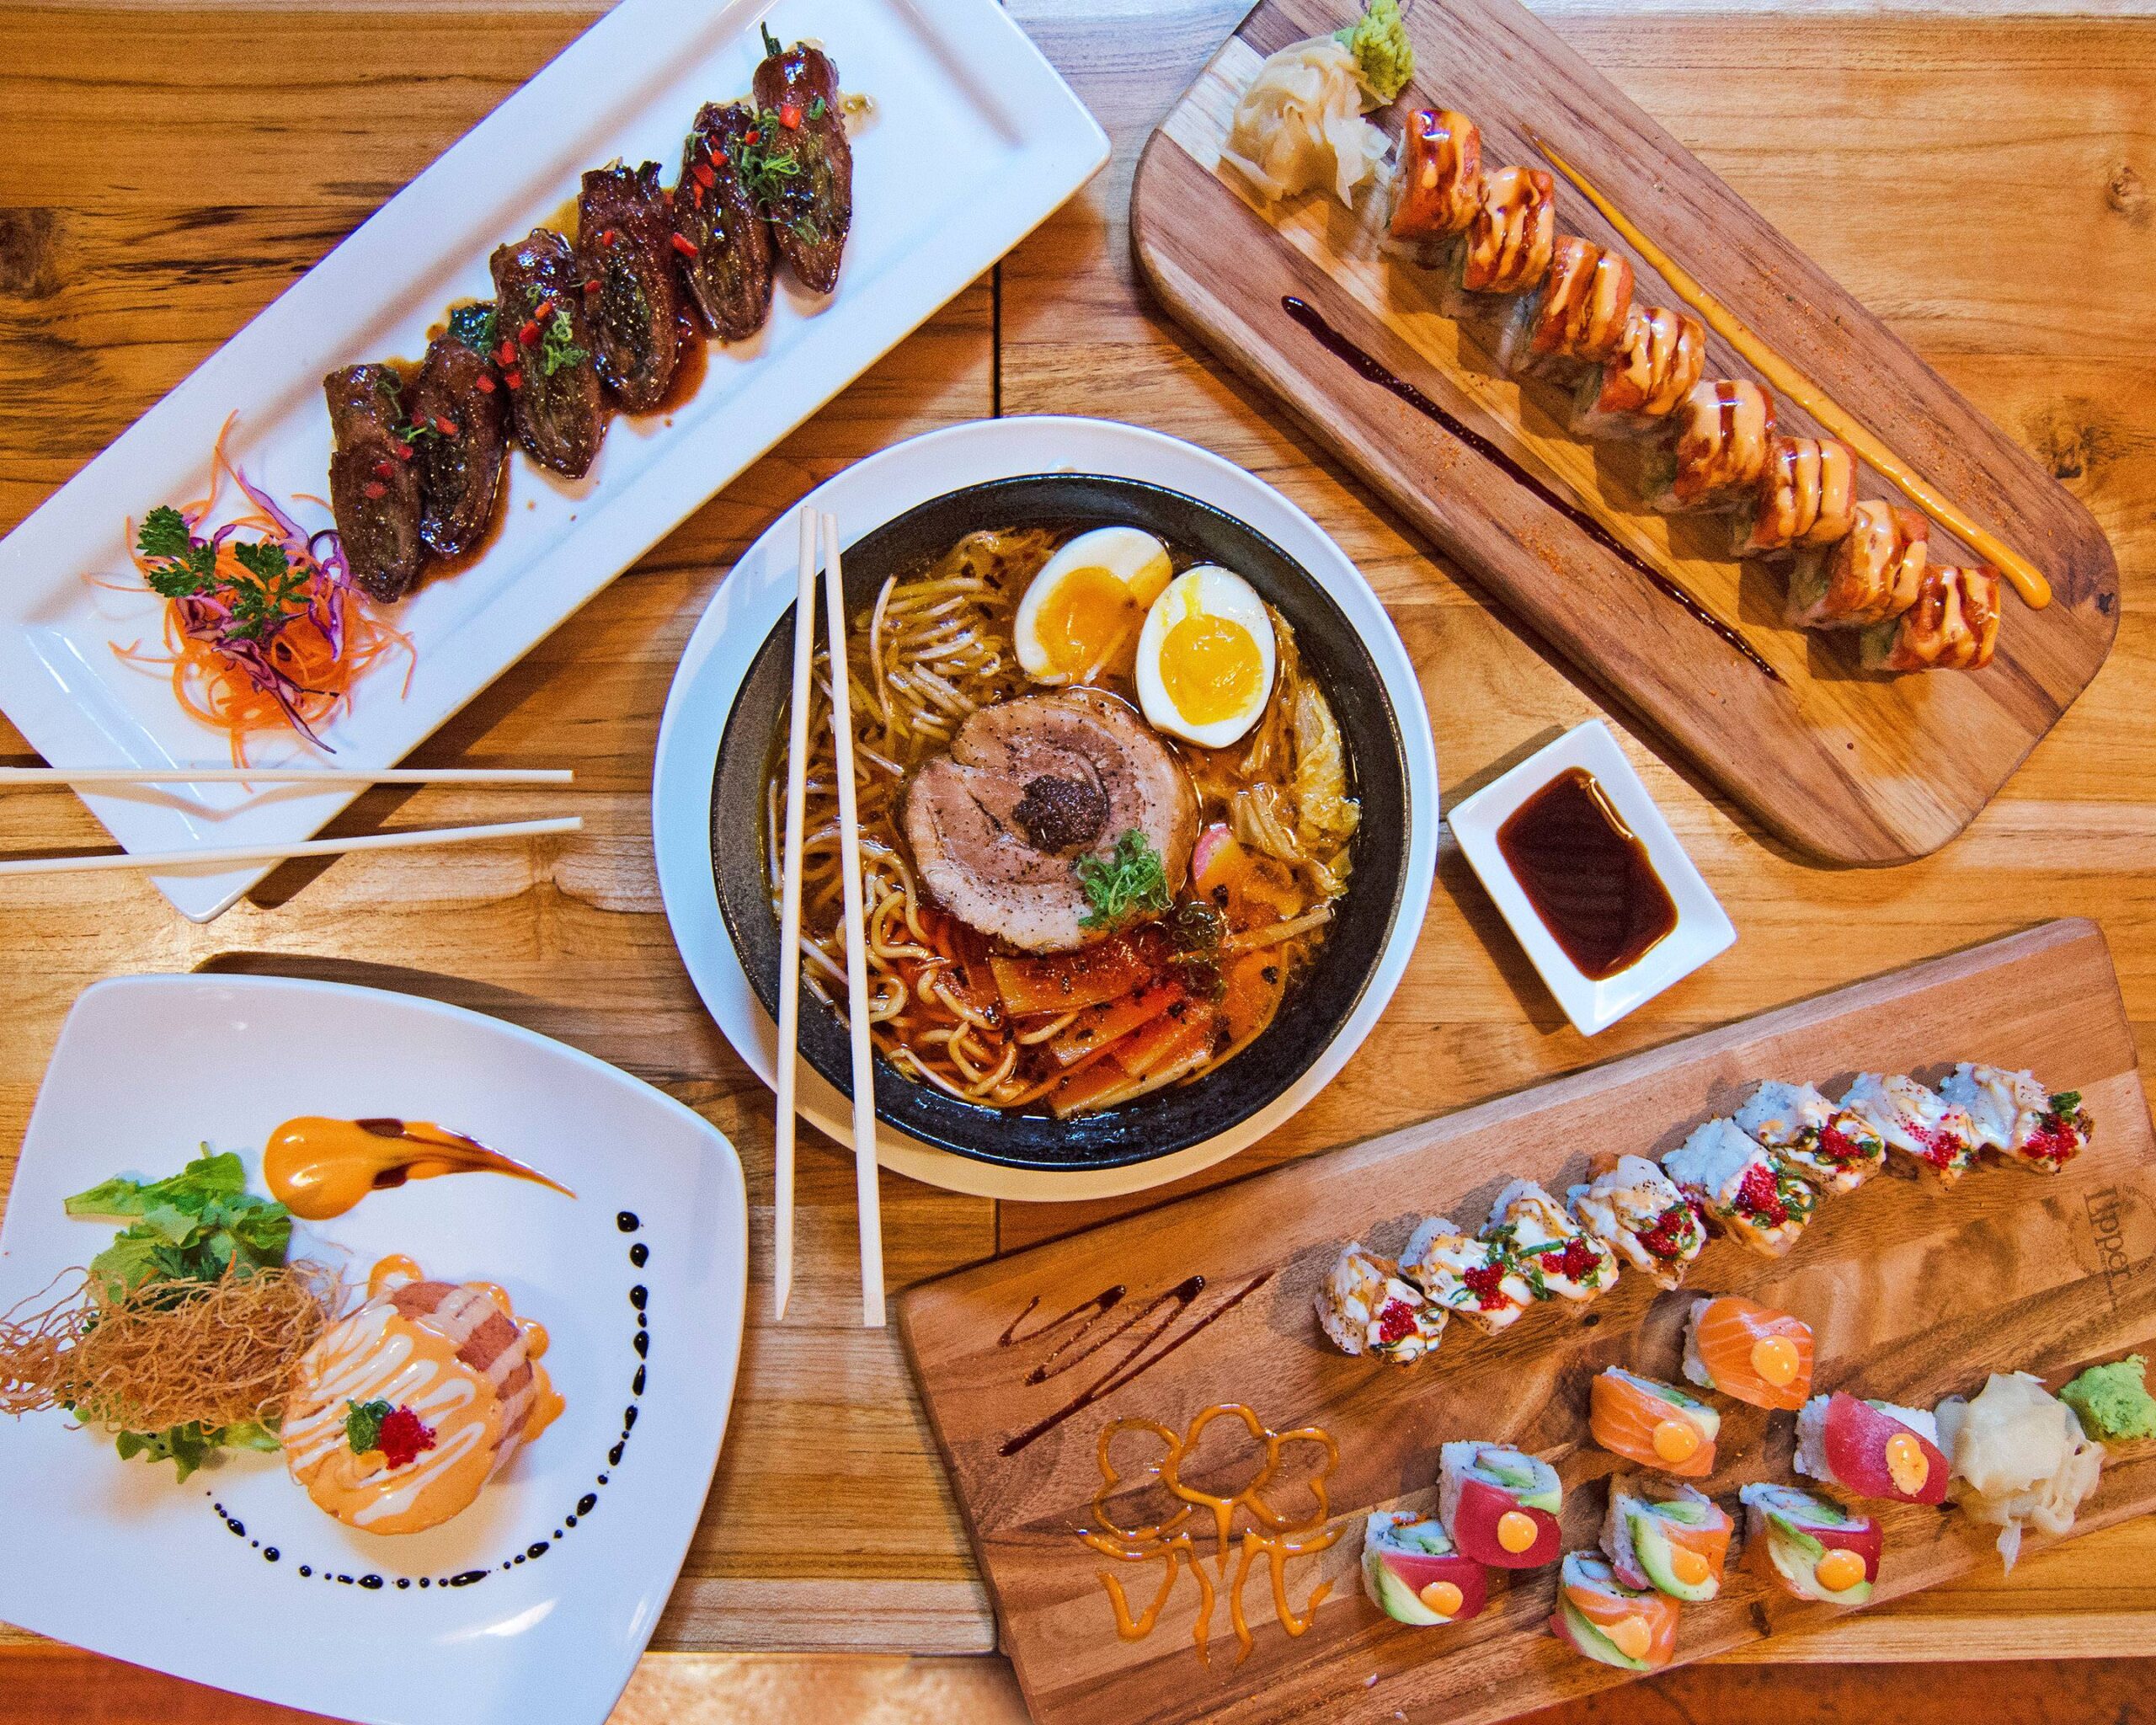 Westlake Village Eats: How To Find Your Perfect Grill And Sushi Bar?